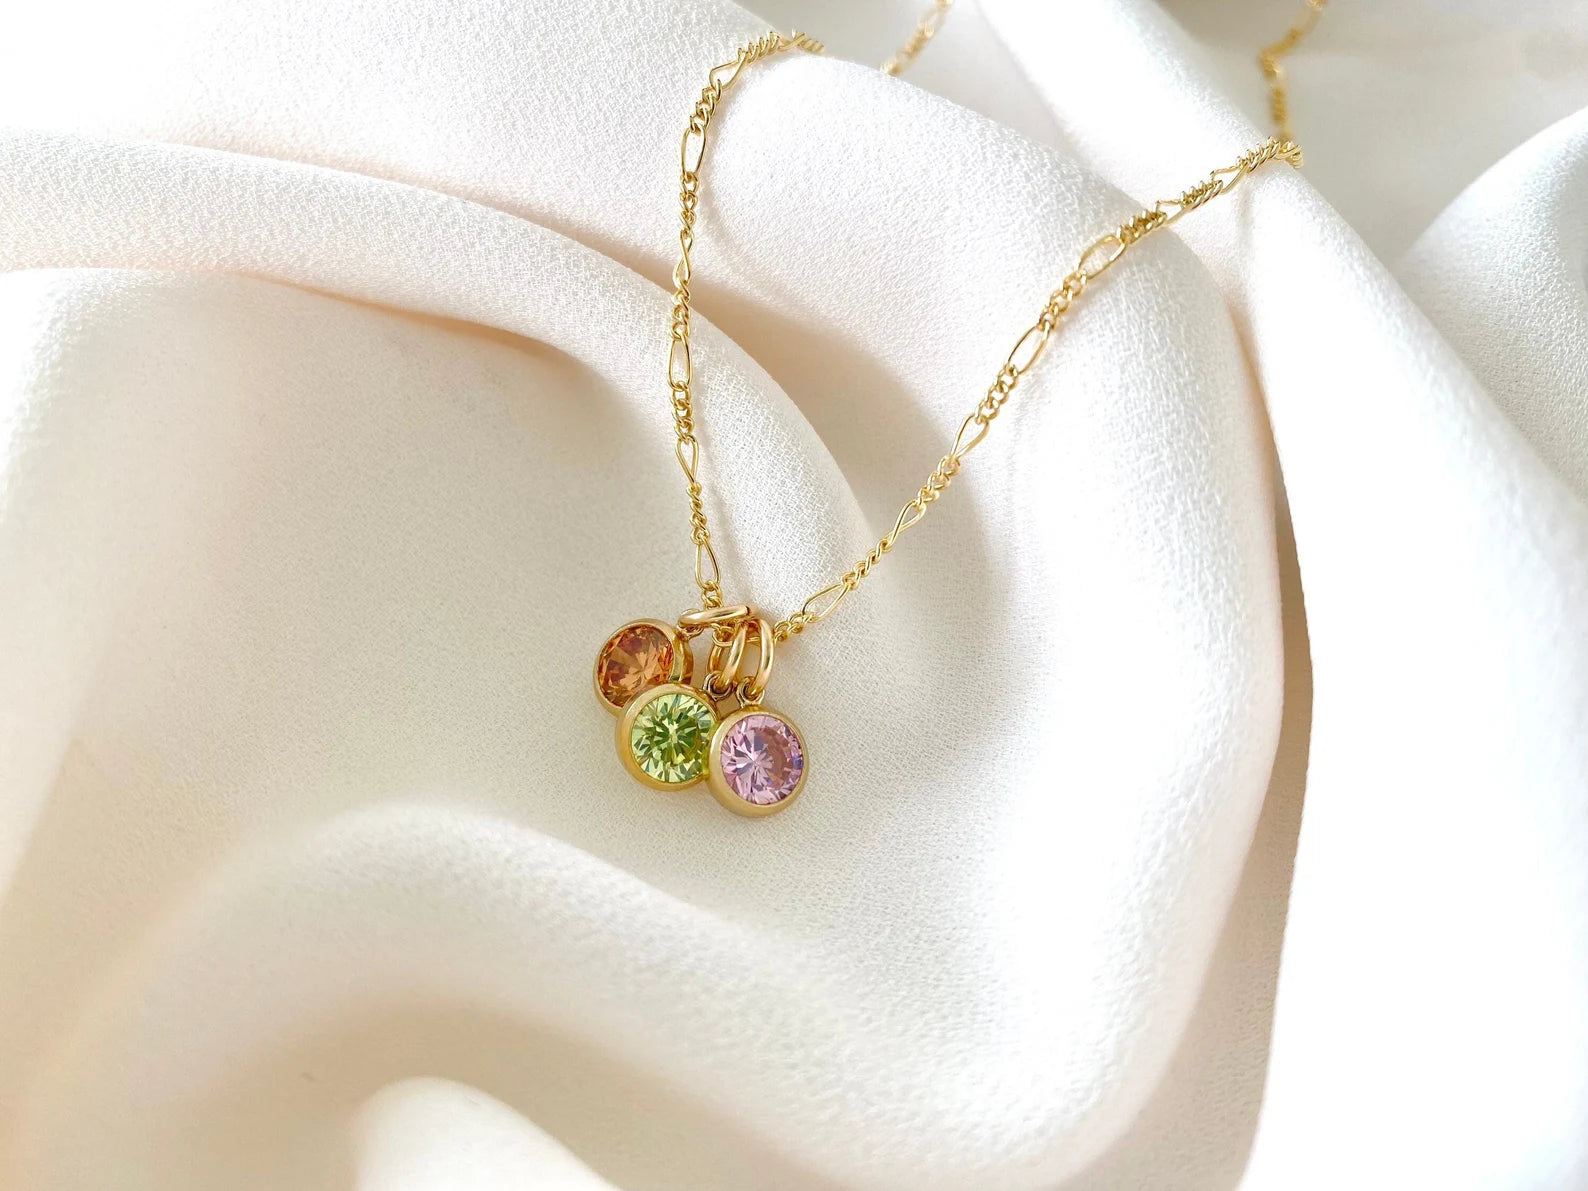 Dainty Birthstone Charm Necklace - Gold Filled - Dainty Coin Pendant - January February March April May June July August September October November December